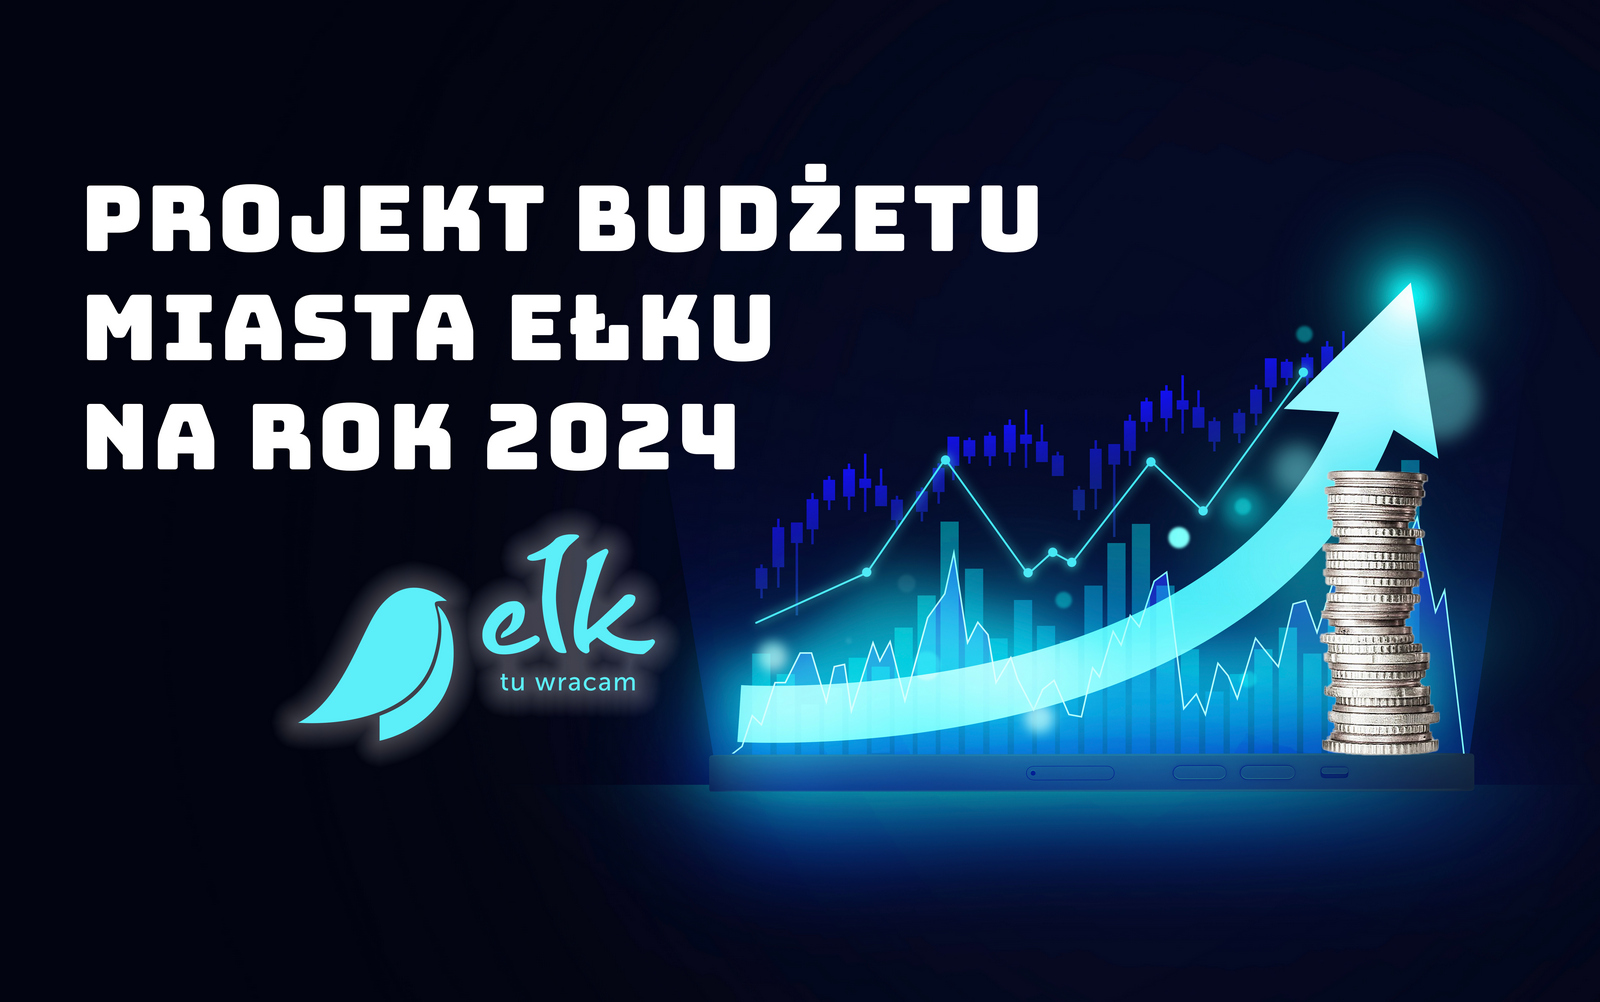 Draft budget of the city of Ełk for 2024